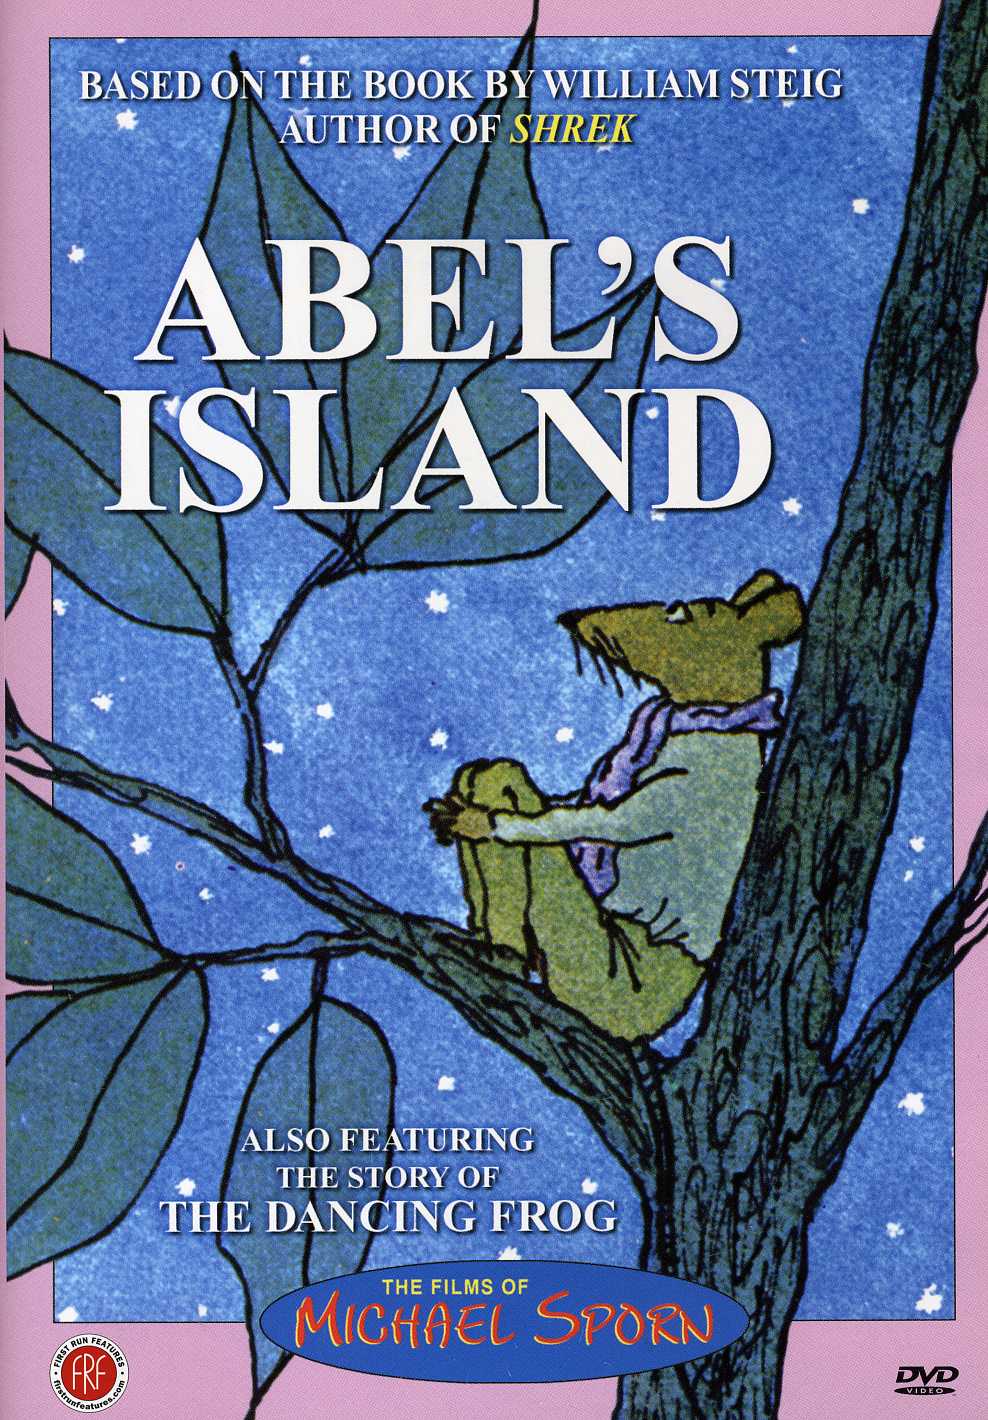 ABEL'S ISLAND & THE DANCING FROG / (COL FULL)